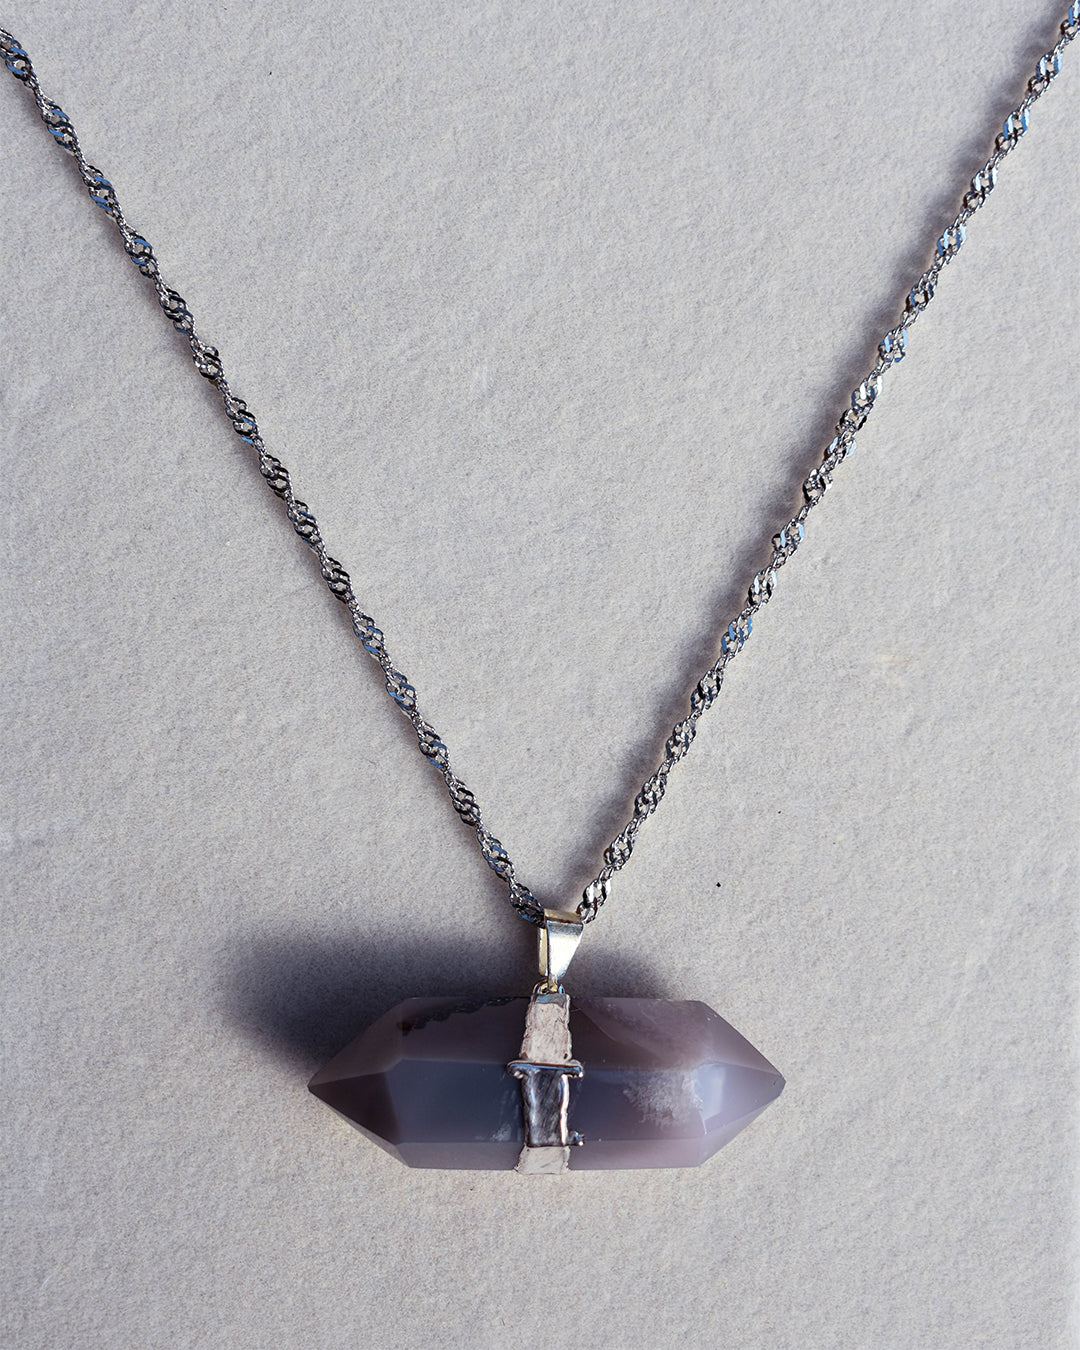 Stainless Steel chain with Agate crystal pendant